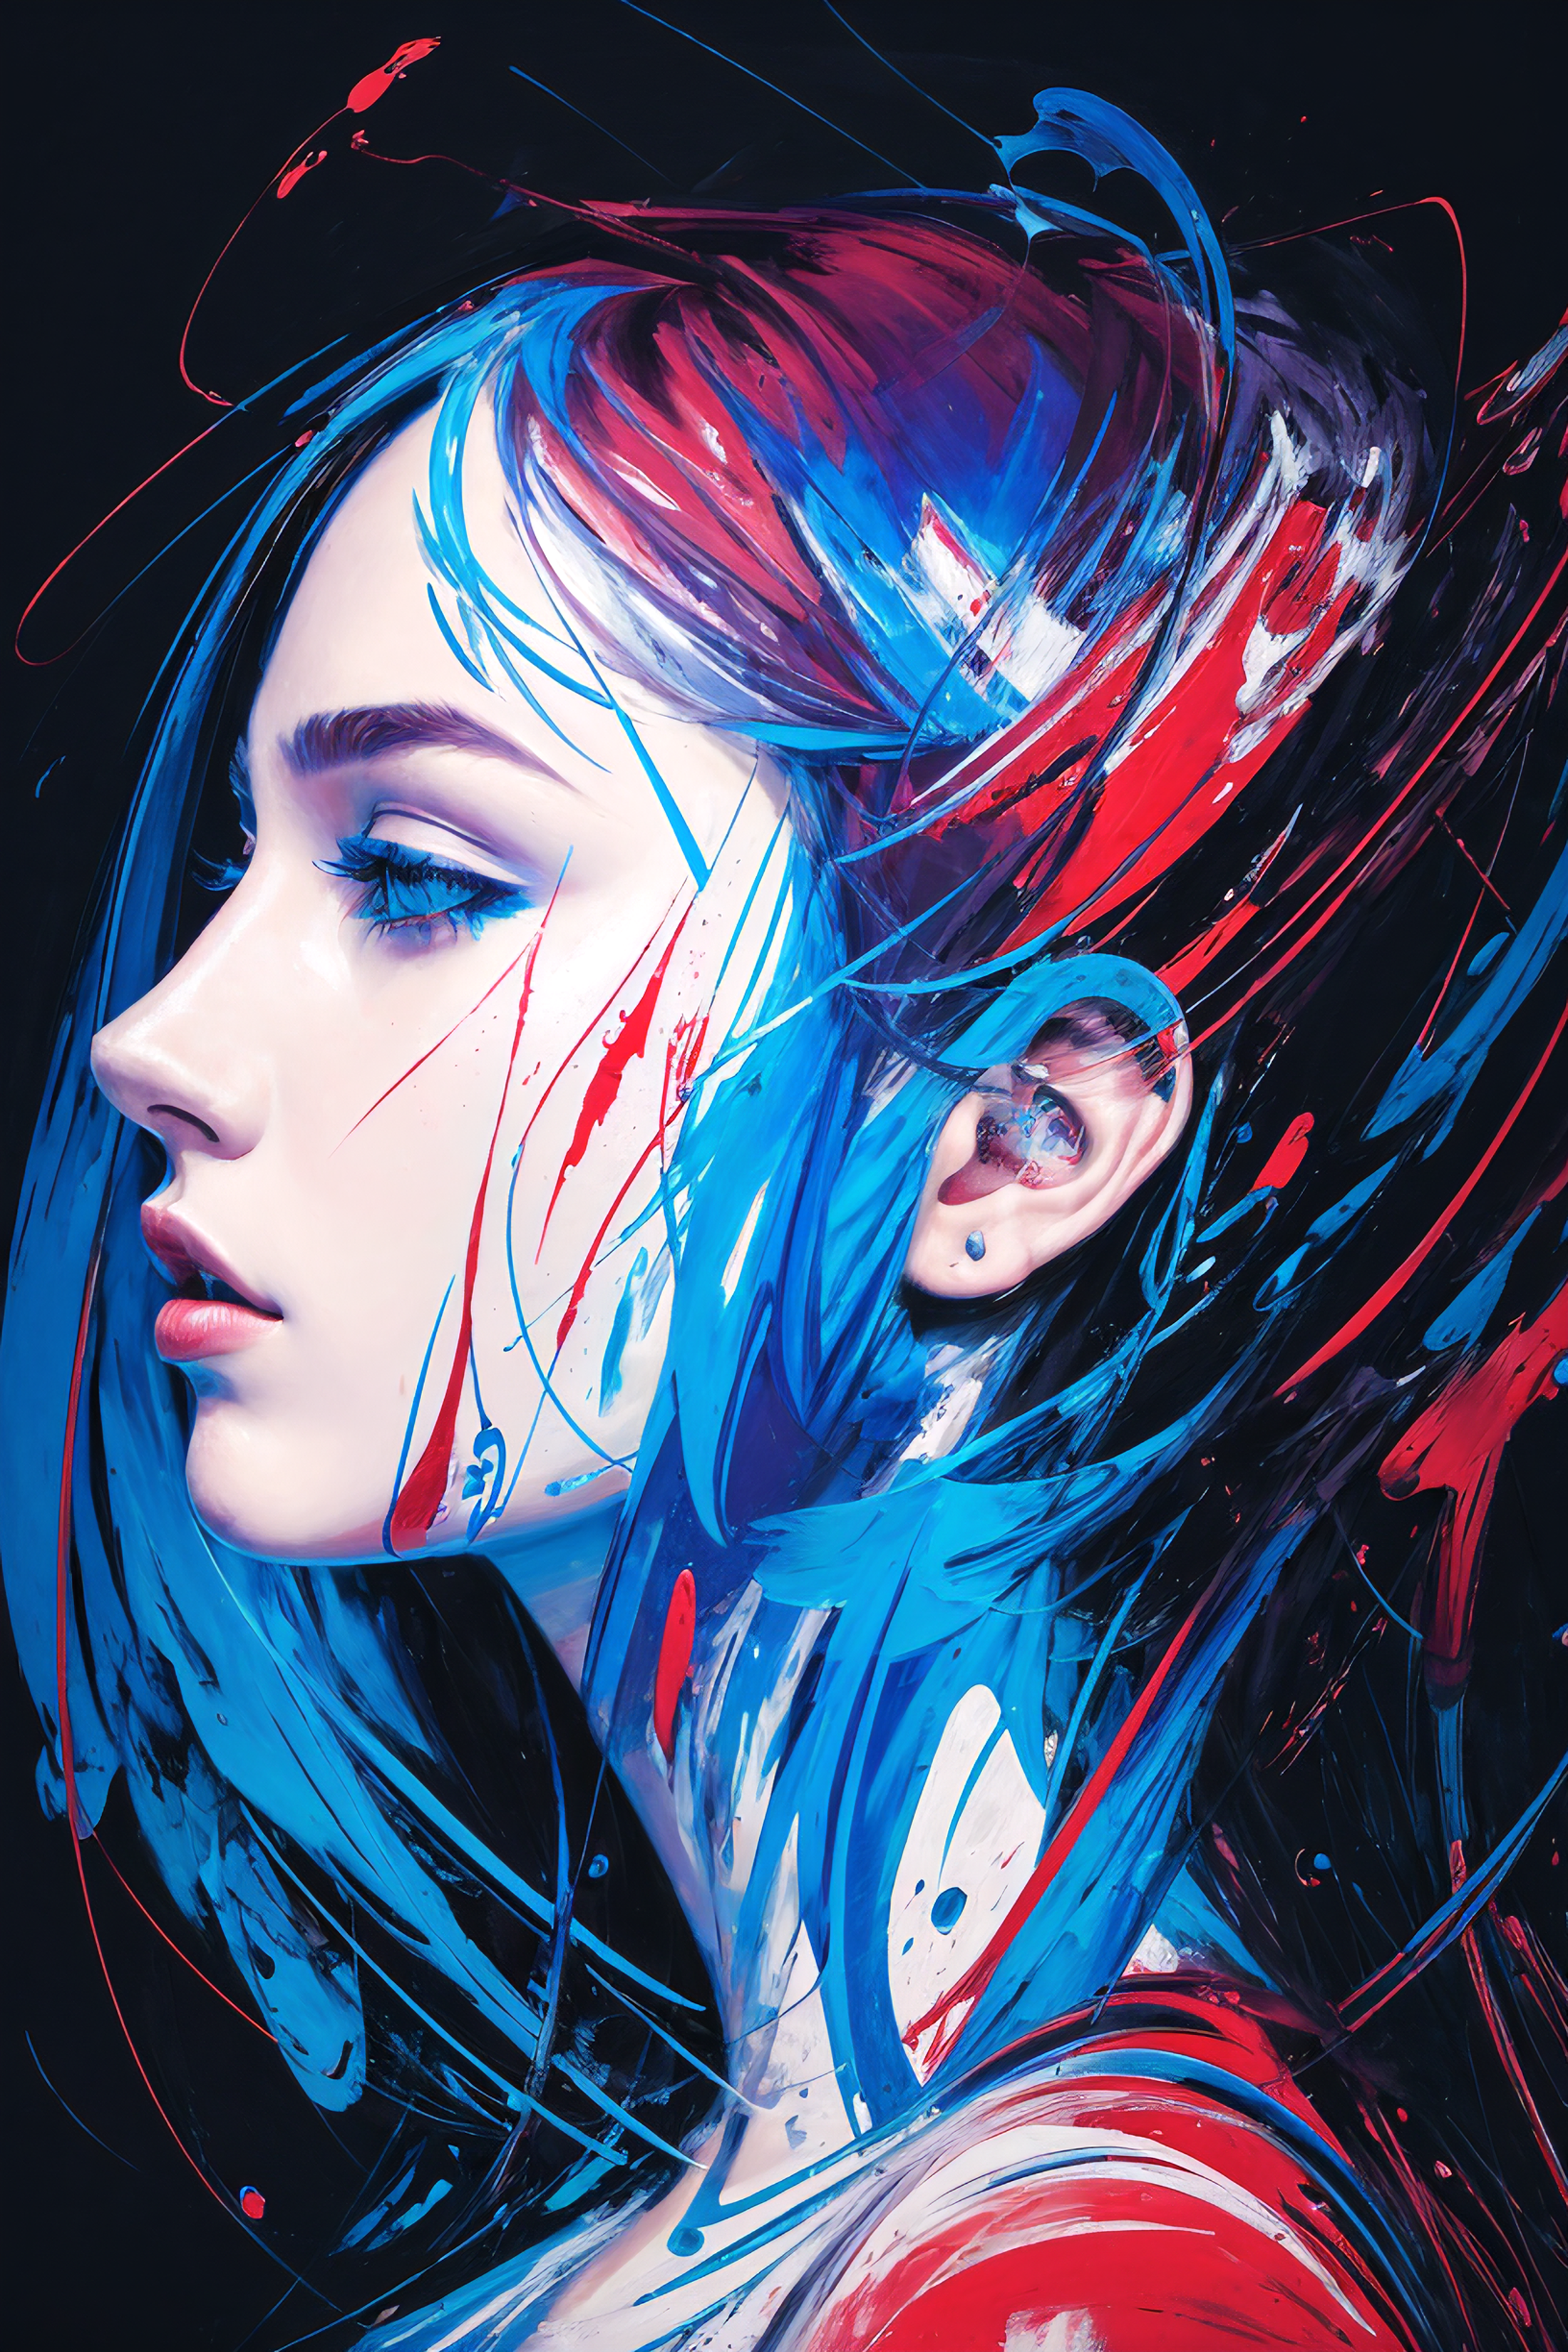 A blue and red painting of a woman with blue eyes, earrings, and blue hair.